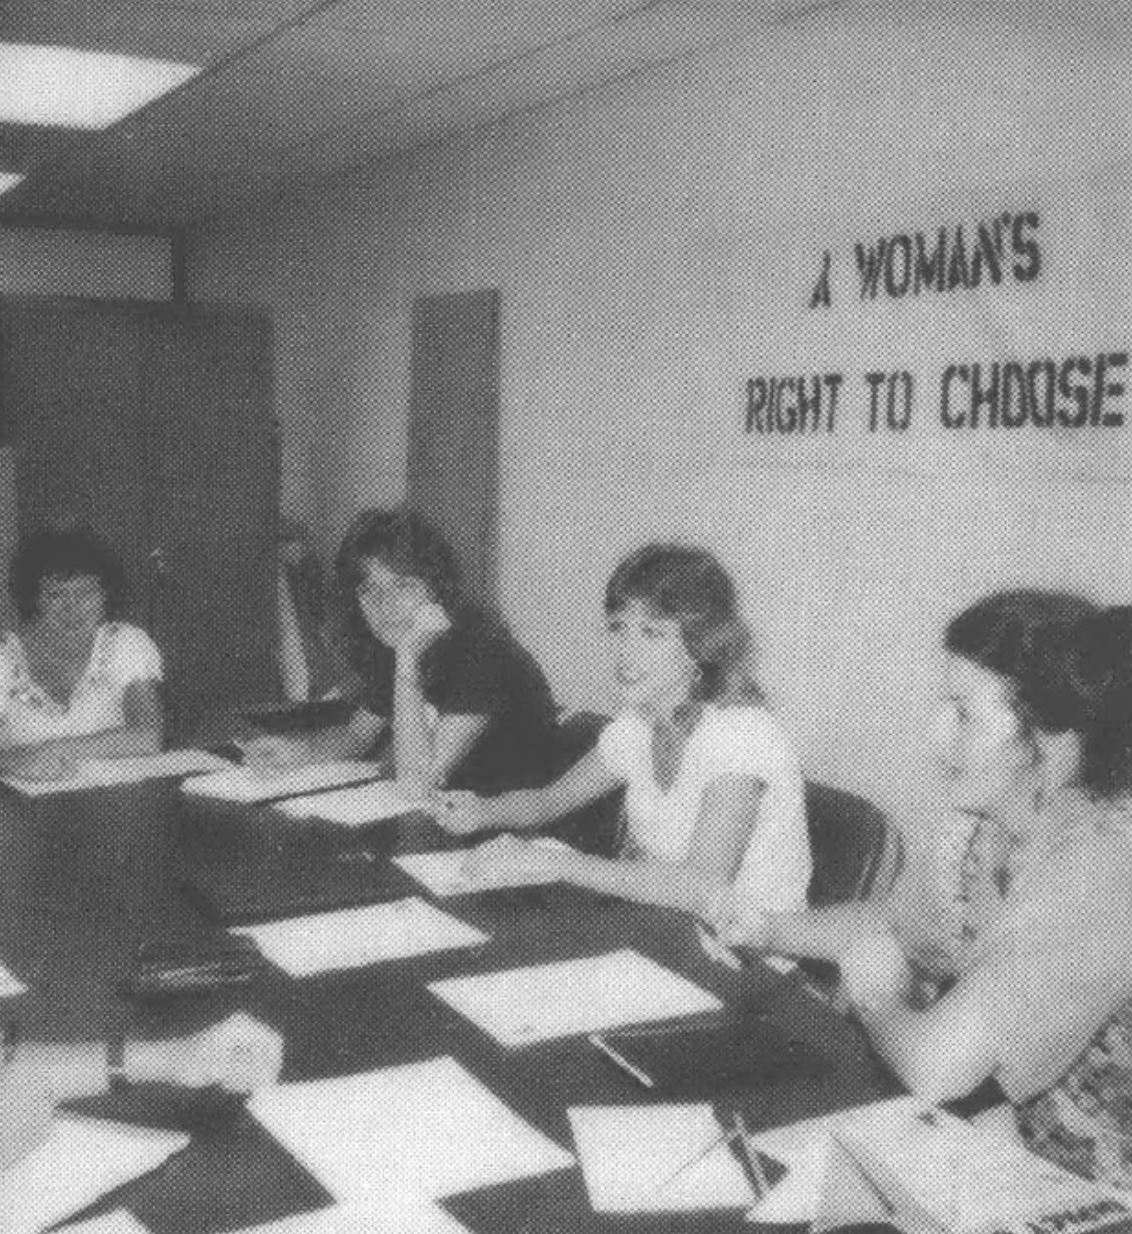 Women at a table with a "A Woman's Right to Choose" banner above them